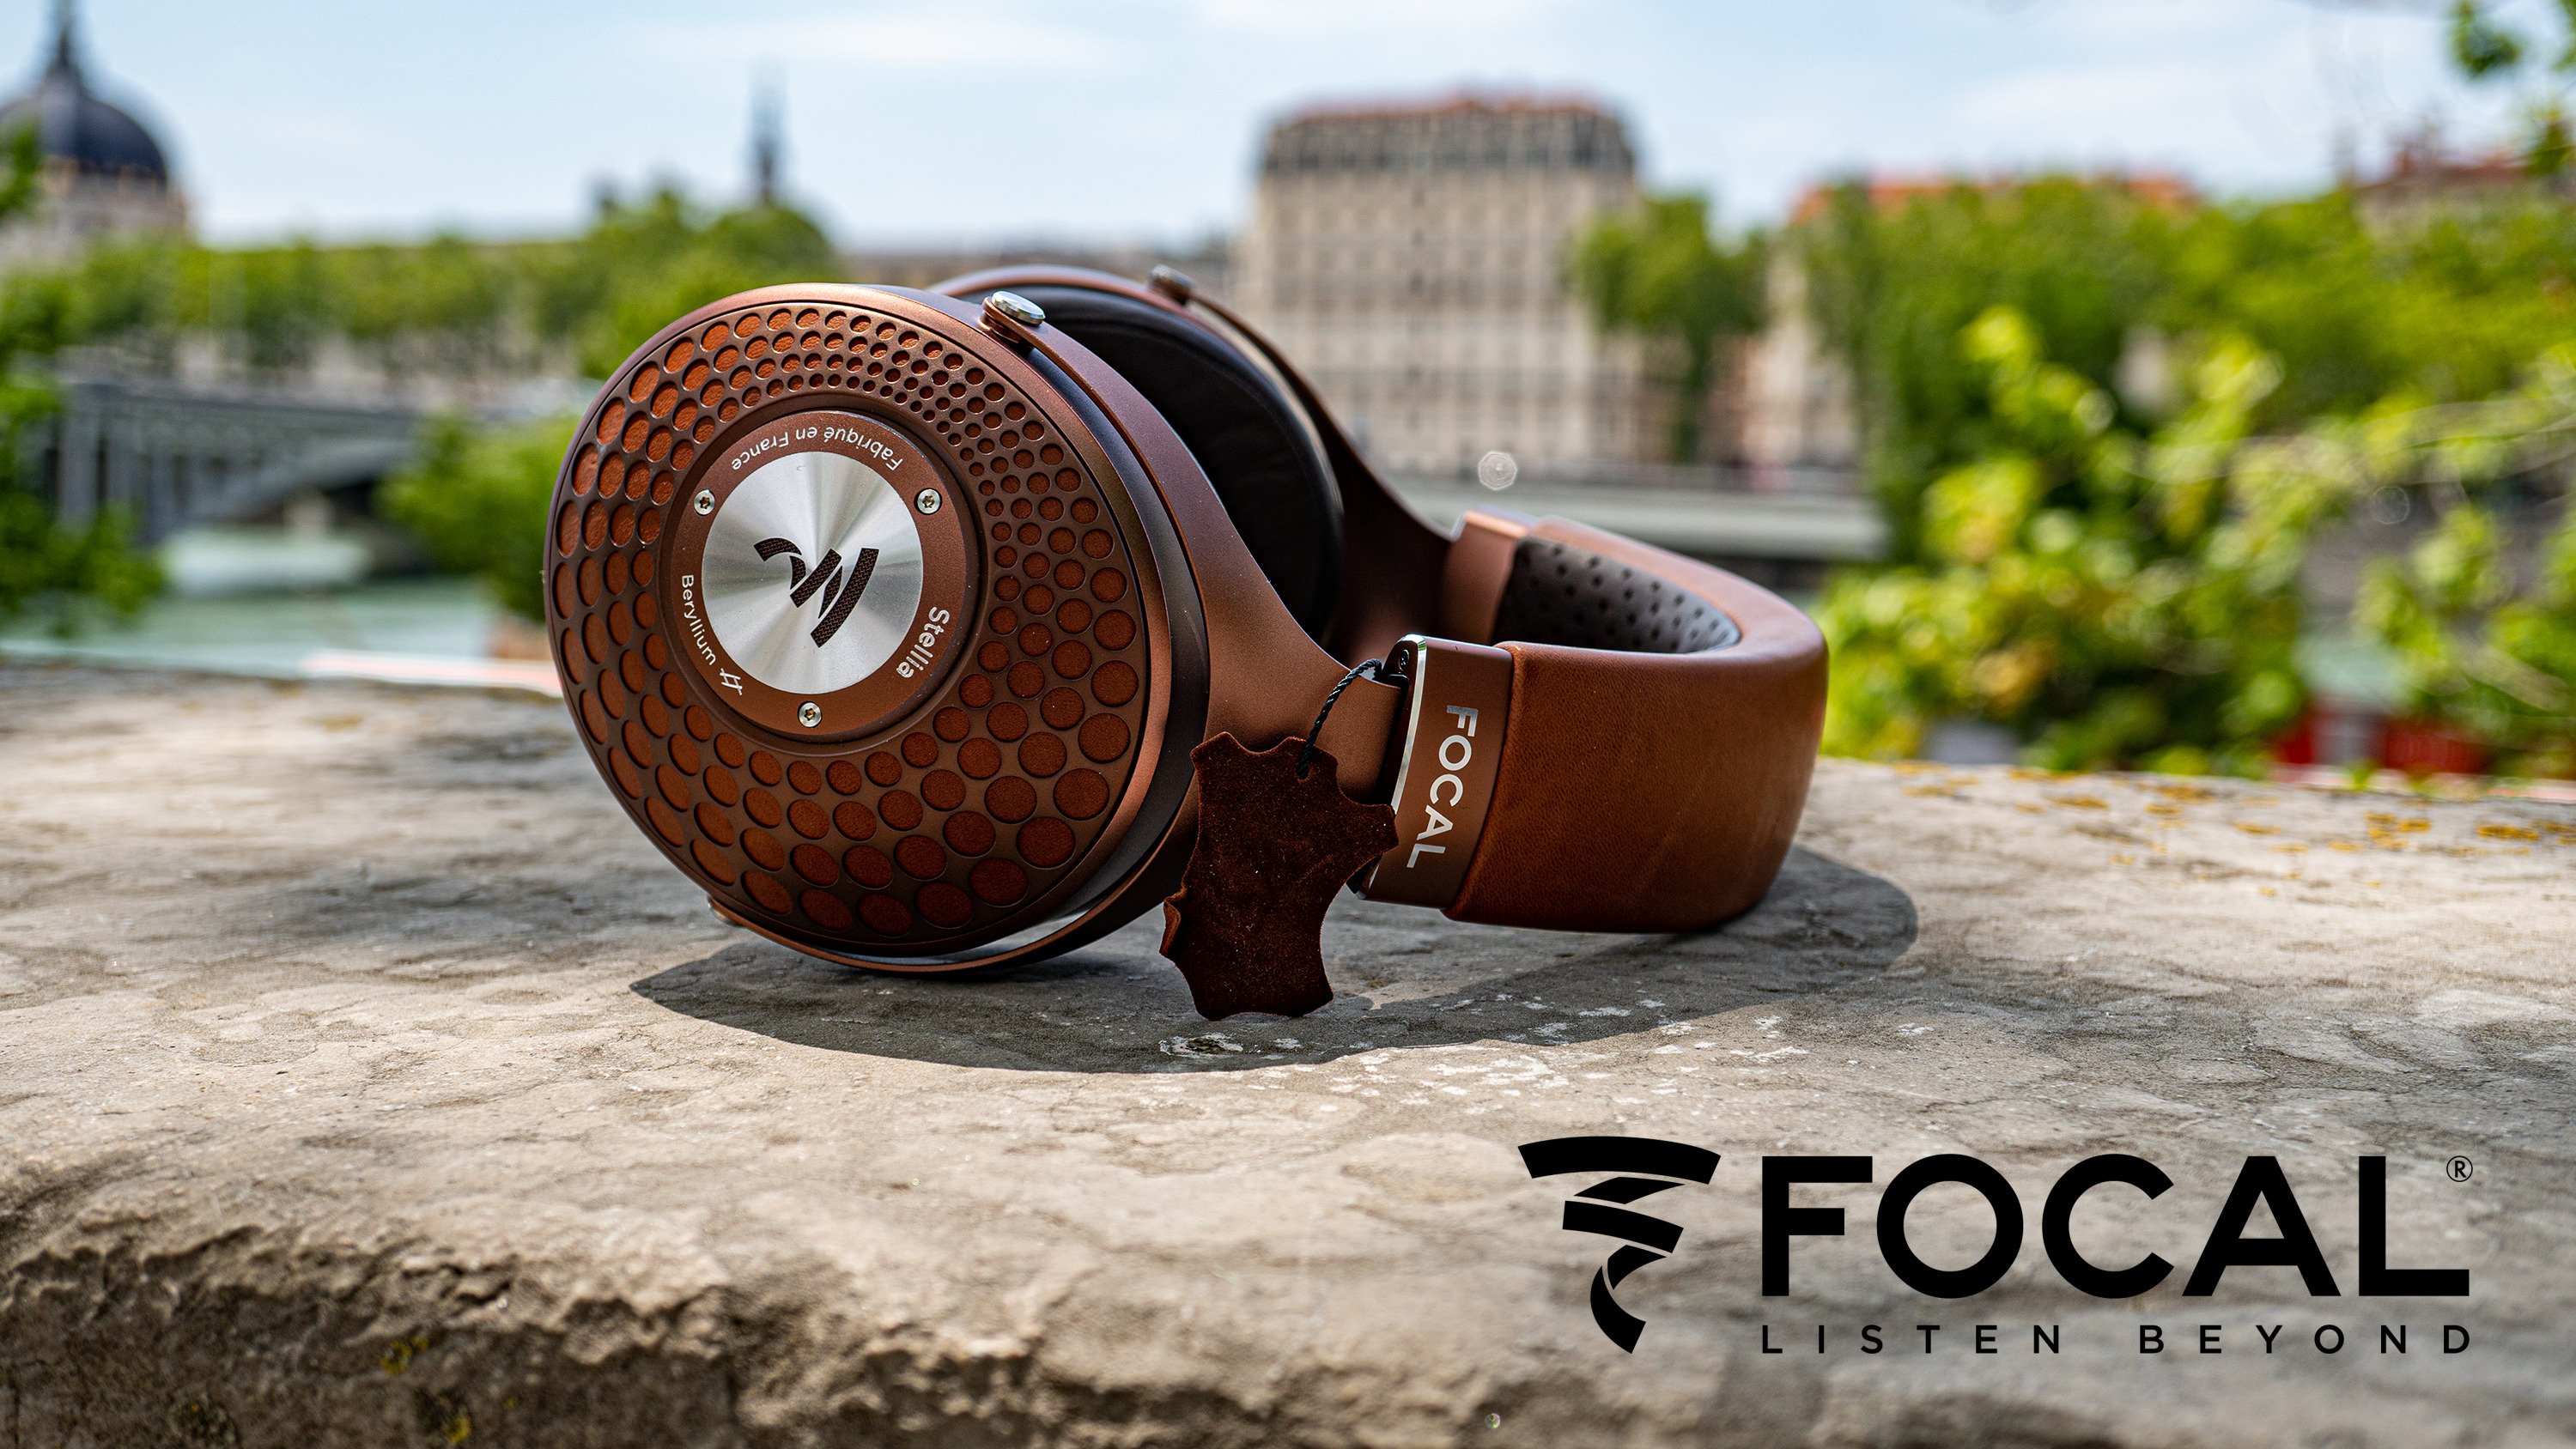 Focal Stellia Closed-Back Headphones in France overlooking the river in Lyon, France